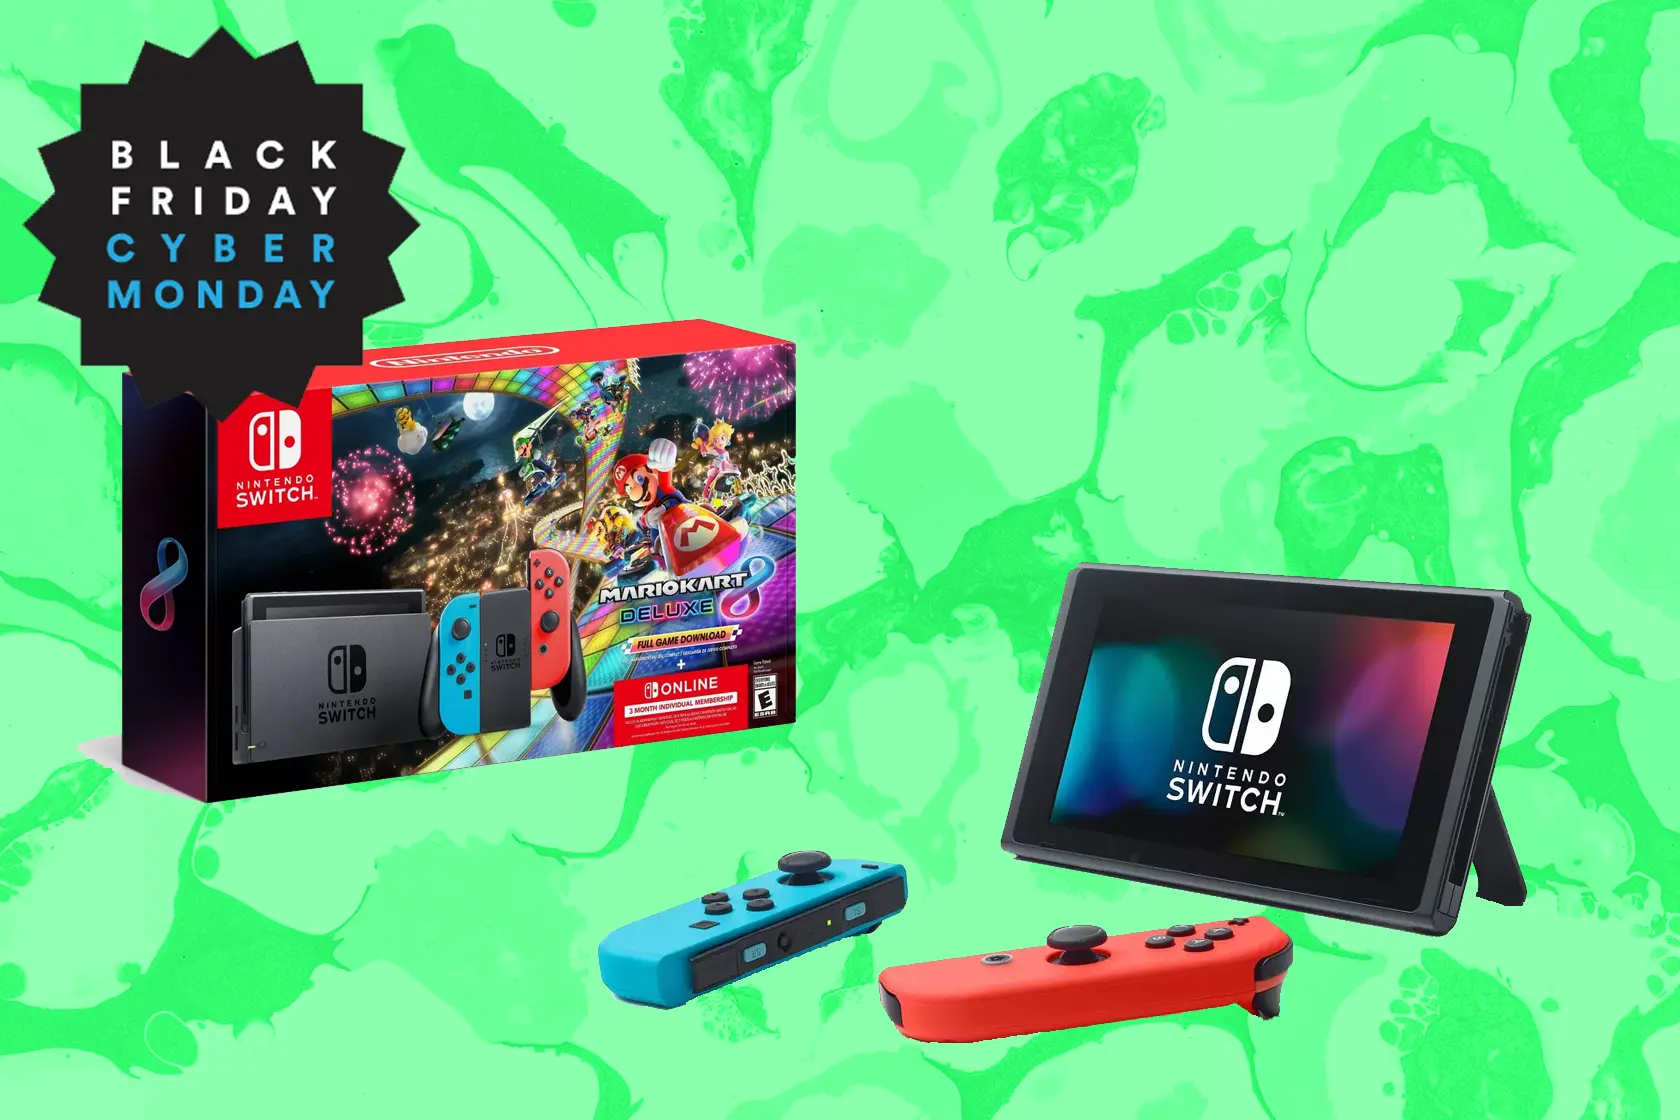 The only Nintendo Switch Black Friday deal I care about still hasn't happened yet